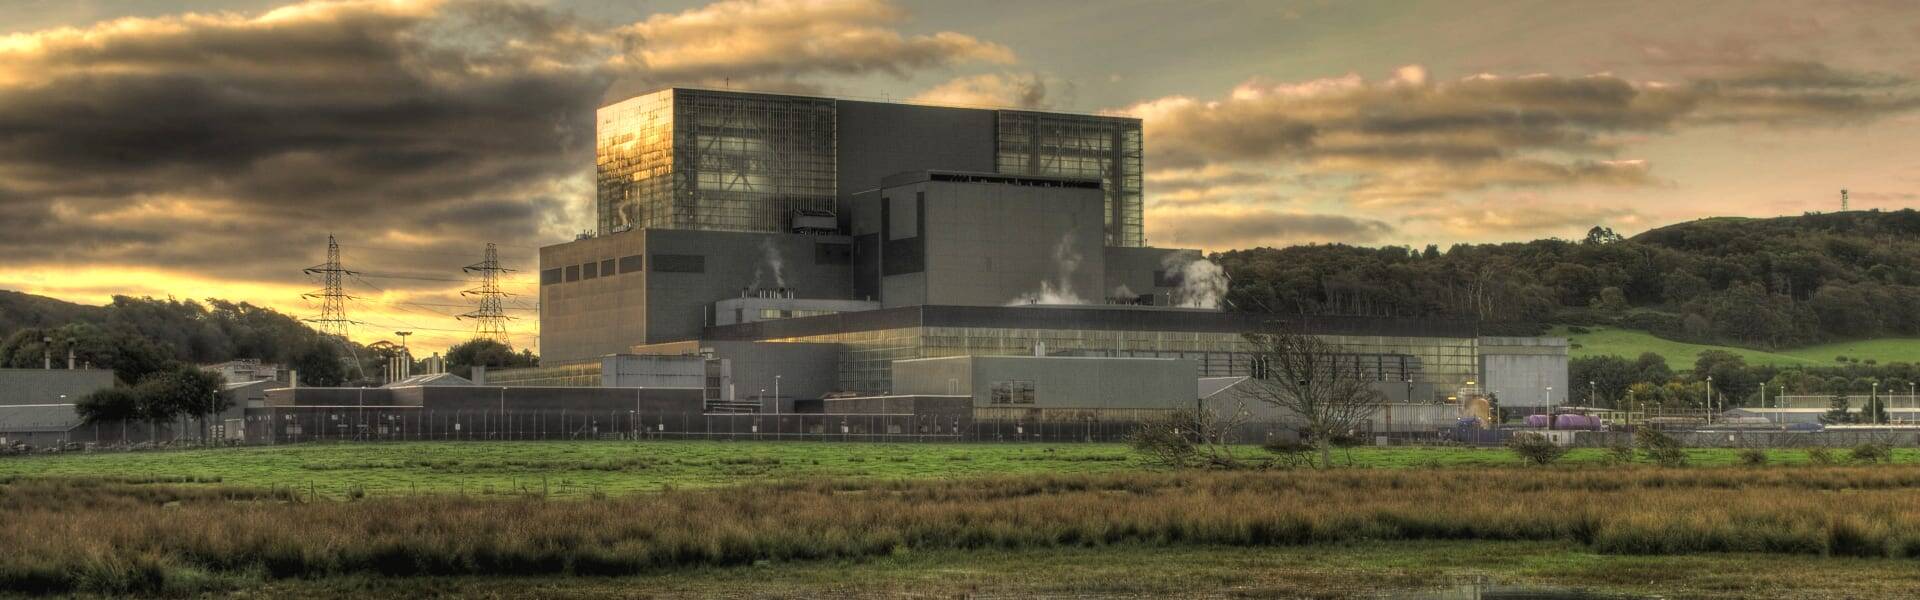 New nuclear plant to get £1.7bn of direct government funding